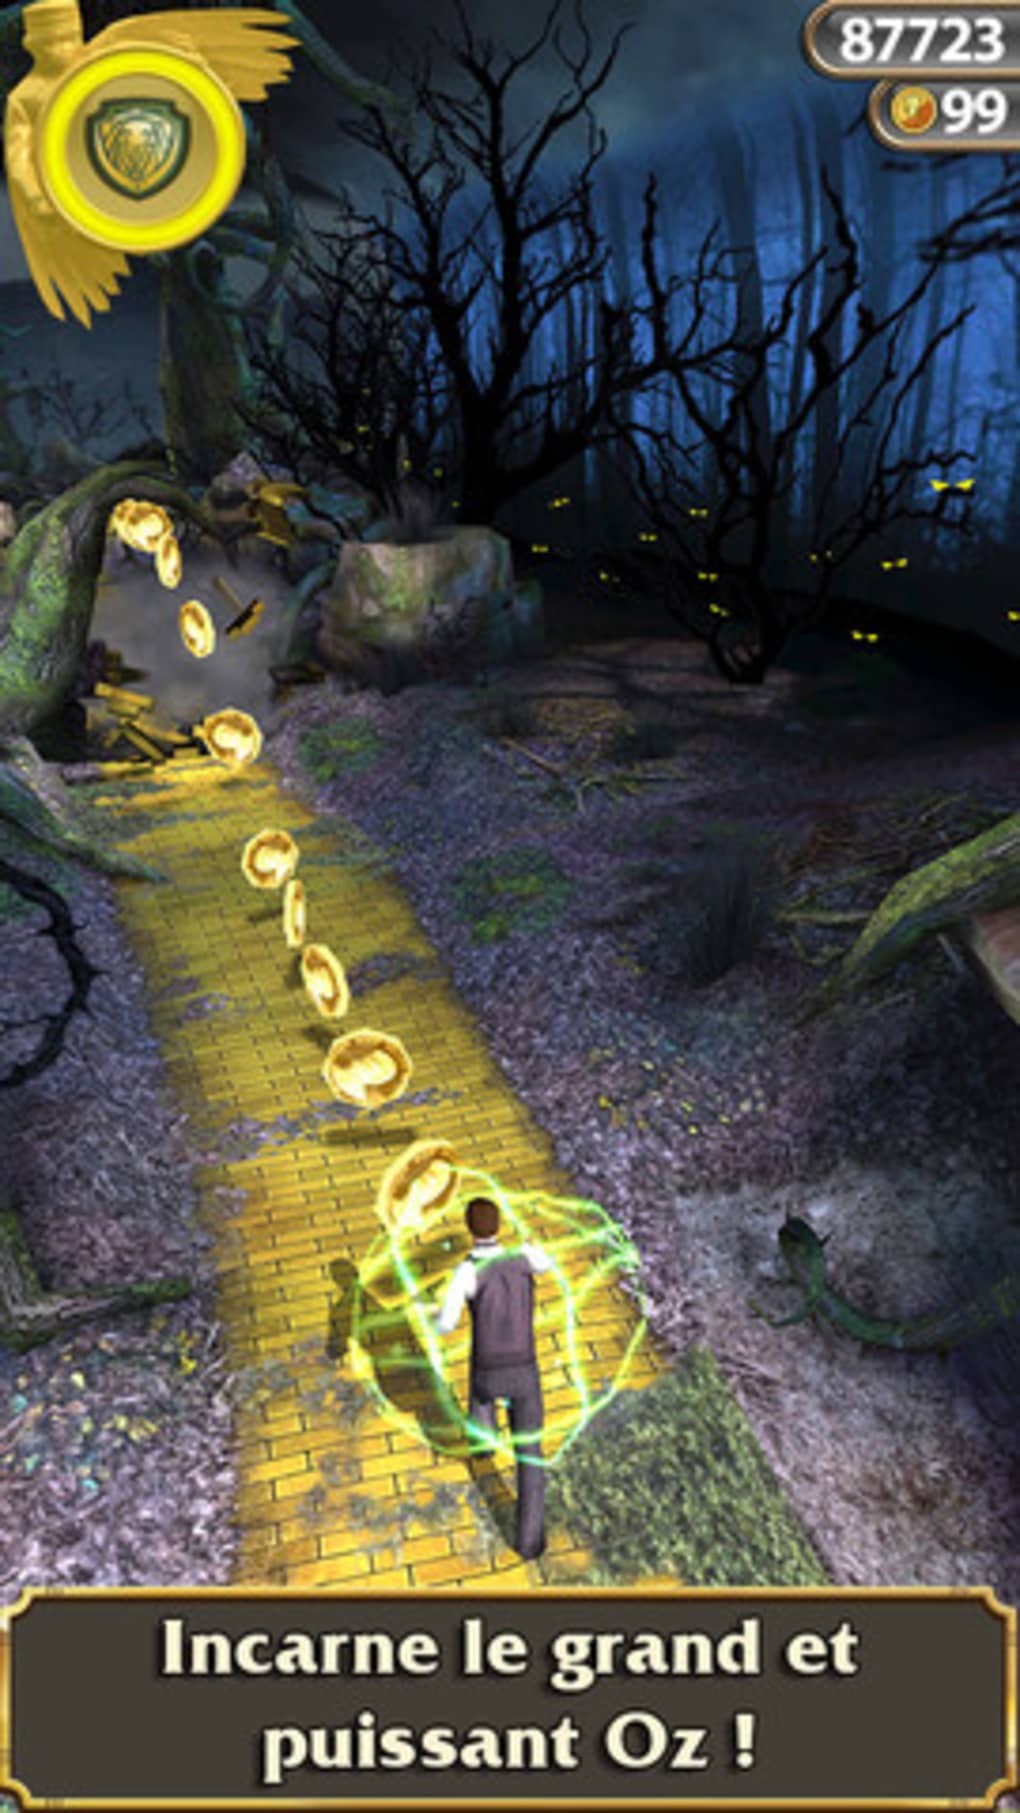 Apple names Temple Run: Oz its new Free App of the Week